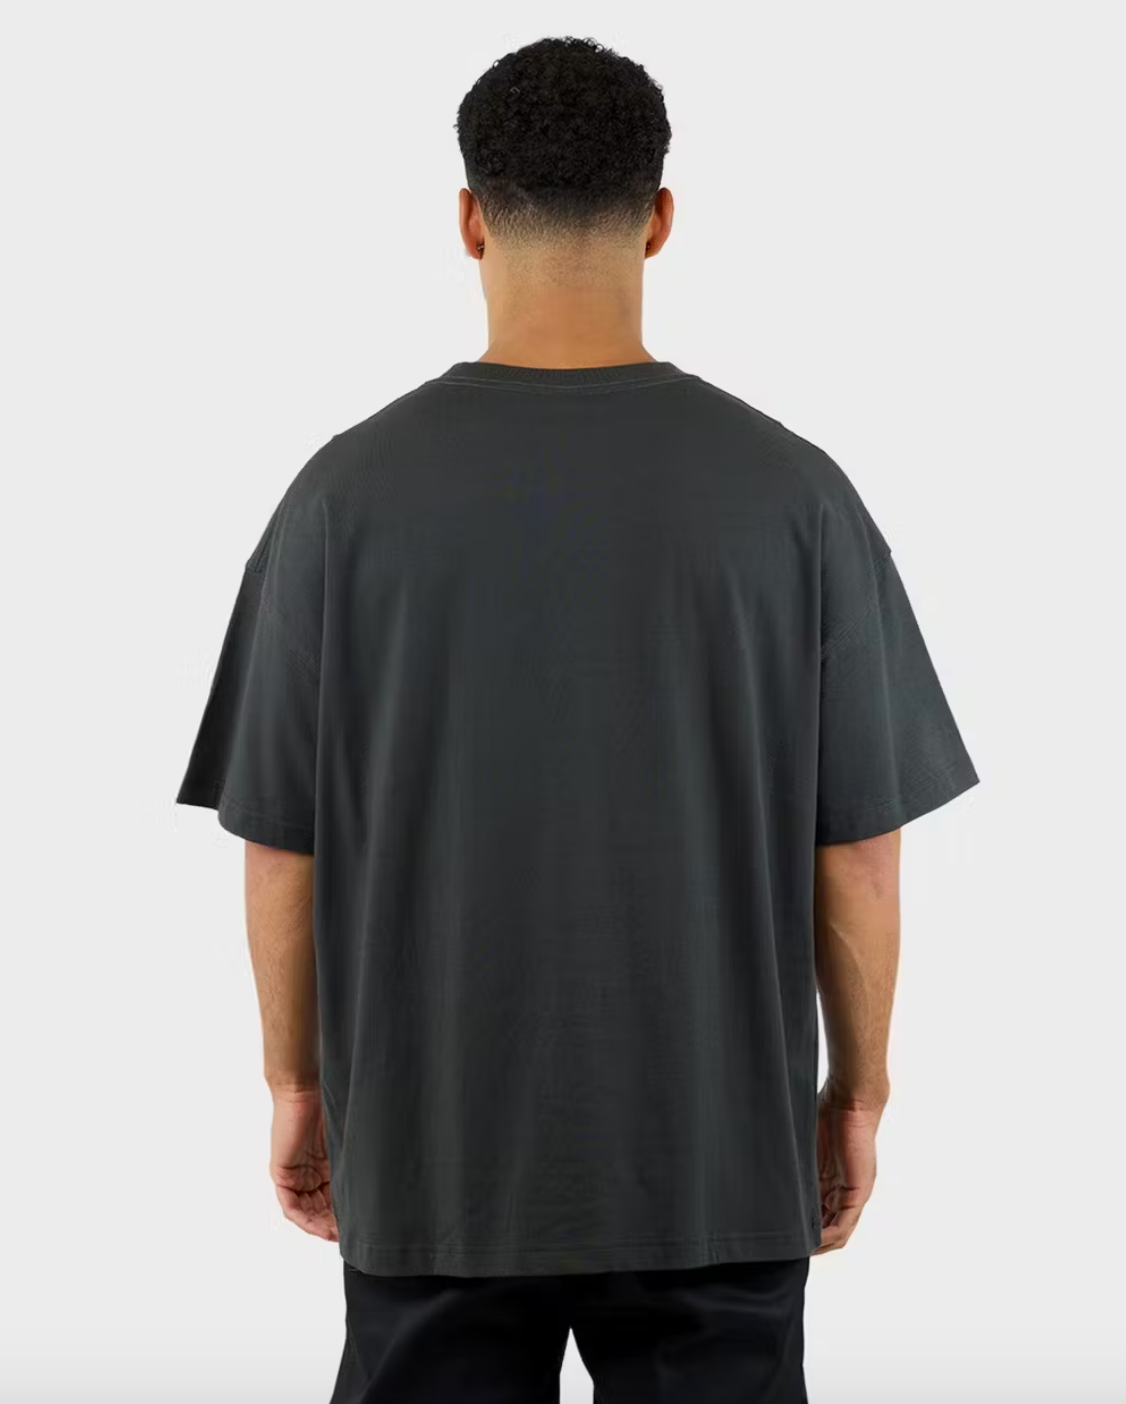 330 Oversized Fit S/S Tee - Washed Graphite